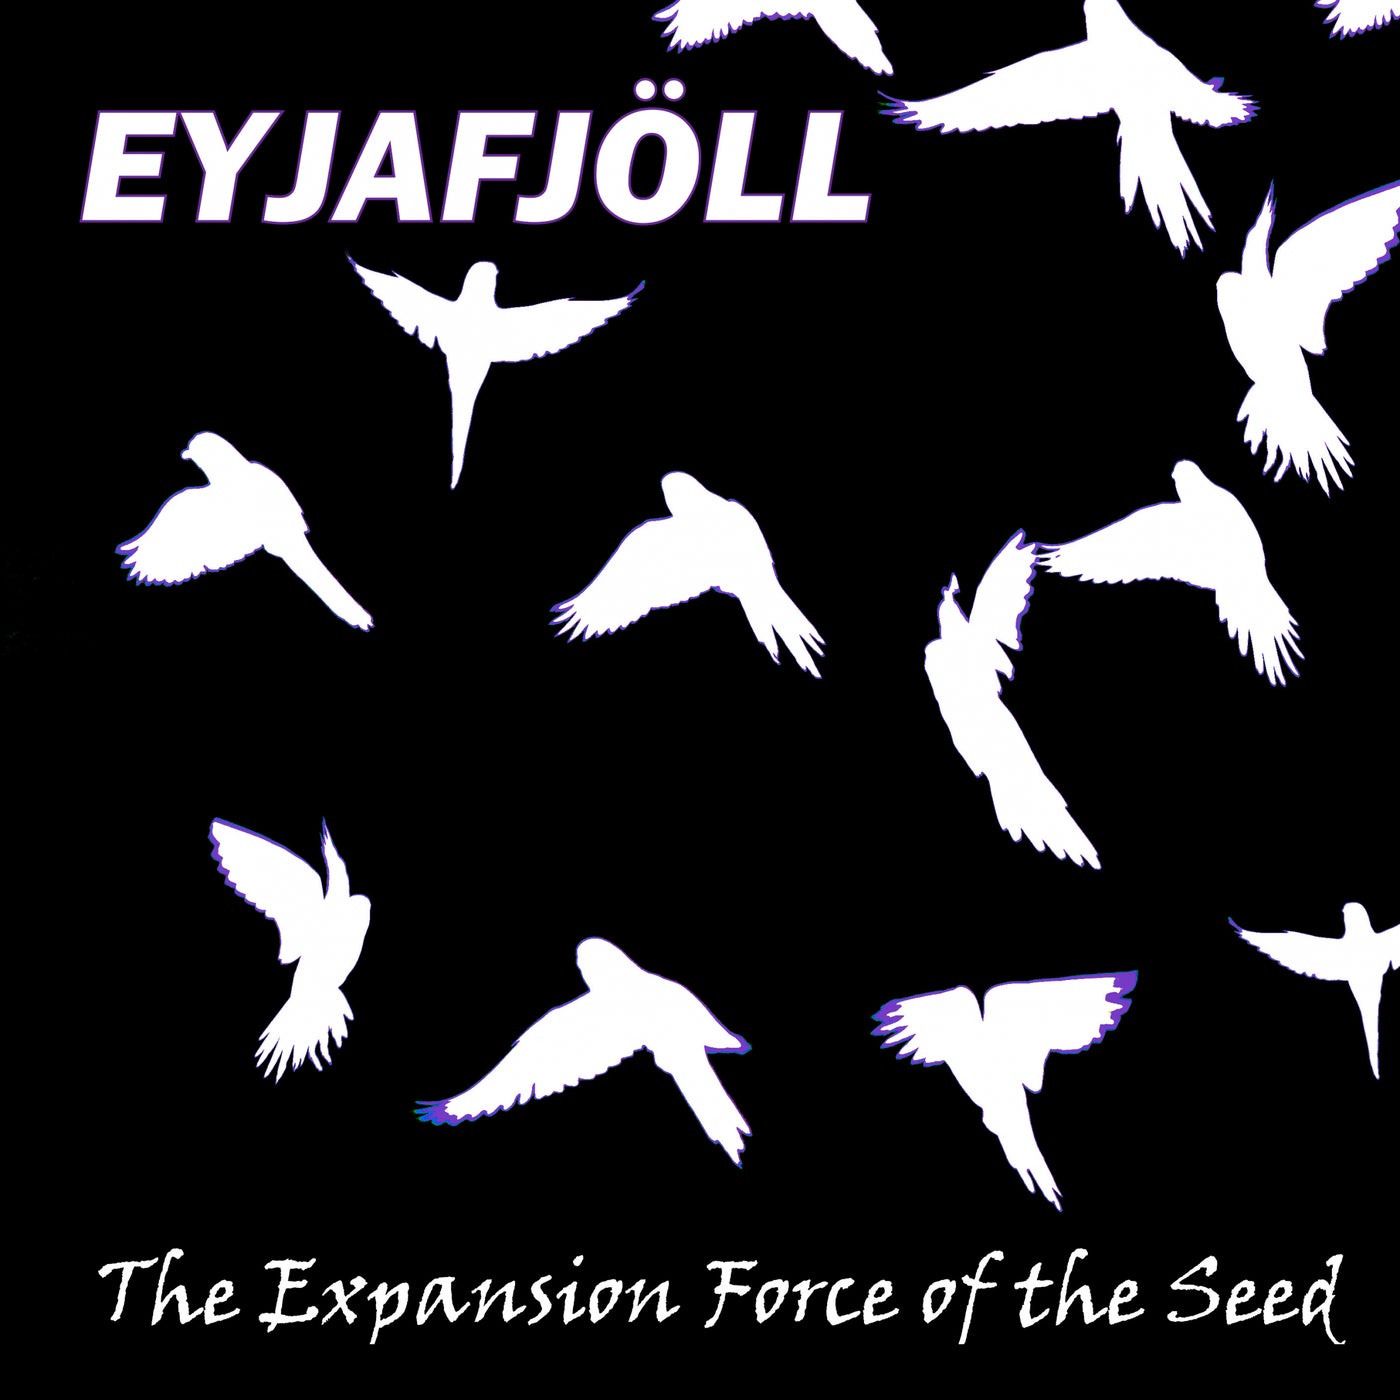 The Expansion Force of the Seed